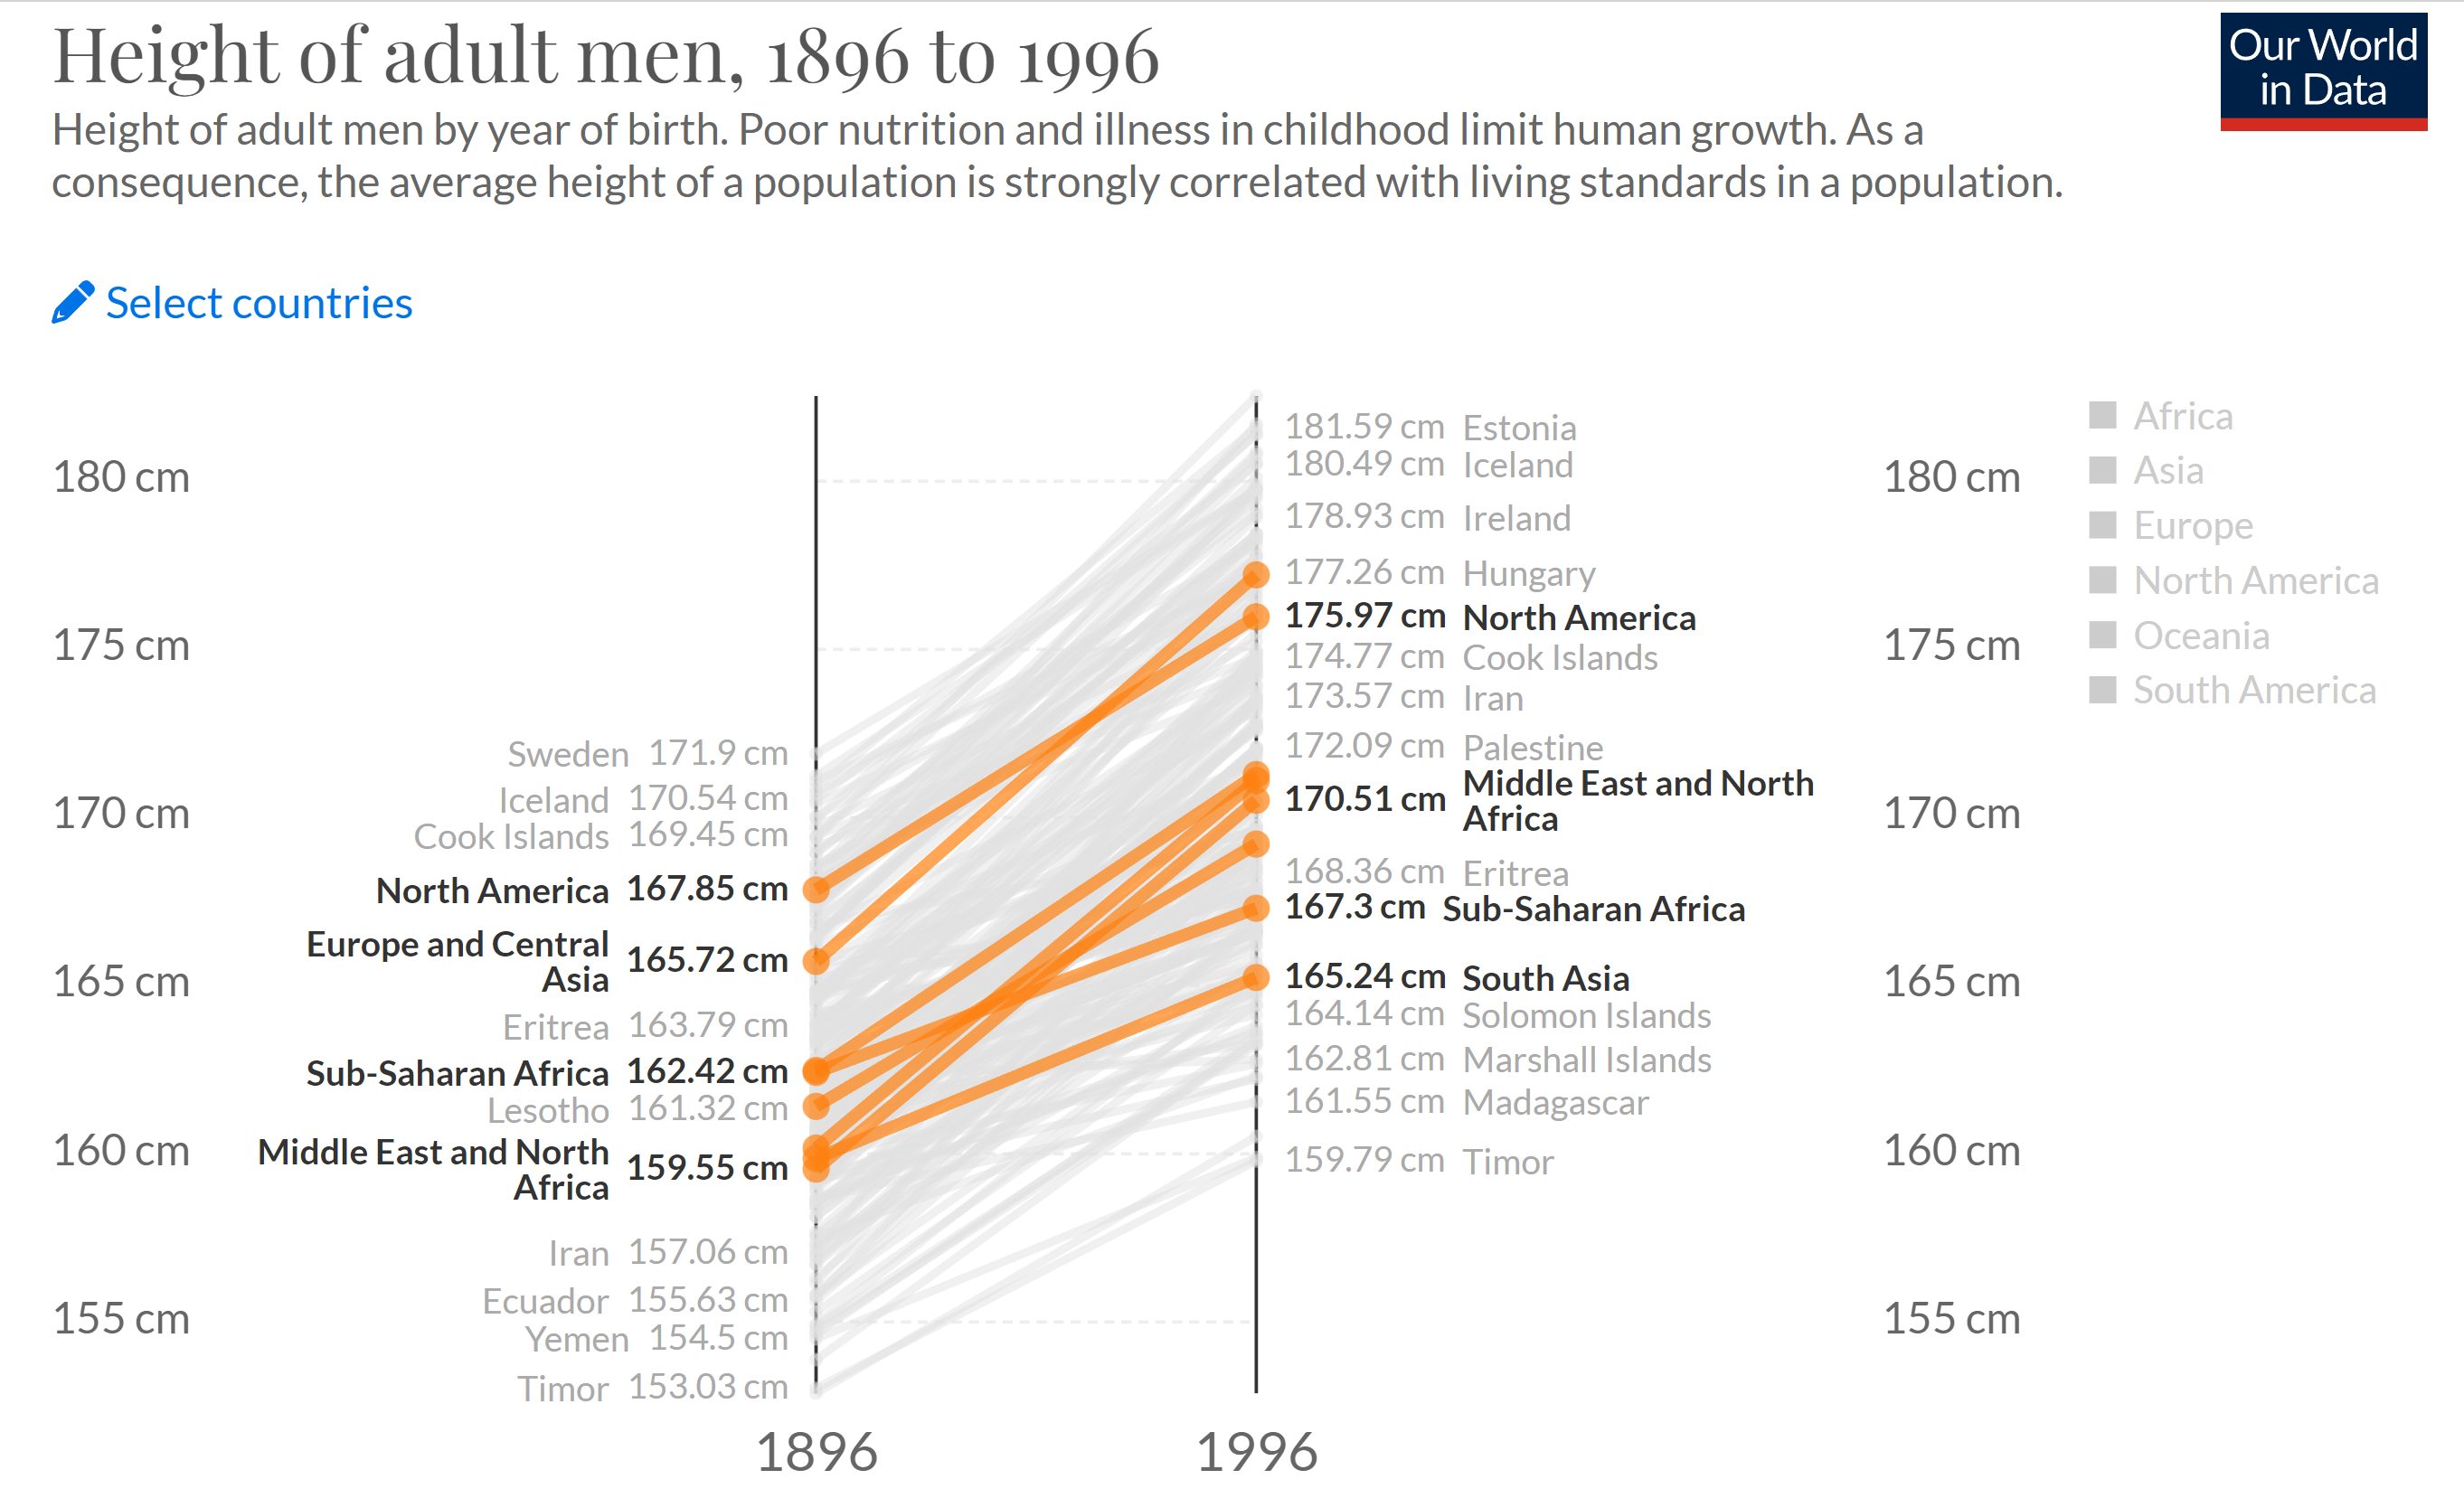 Human Height from 1896 to 1996